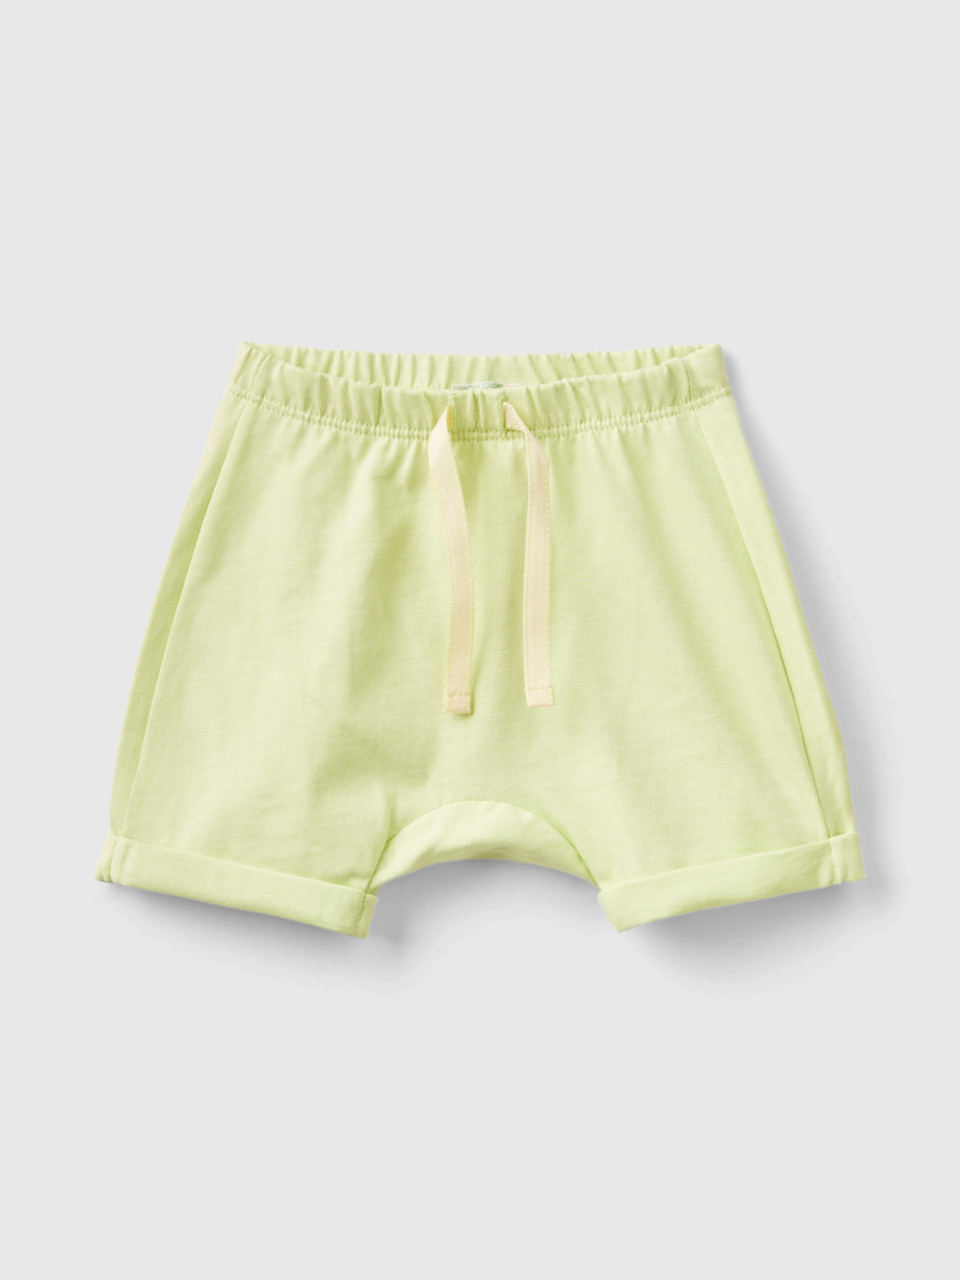 Benetton, Shorts With Patch On The Back, Lime, Kids